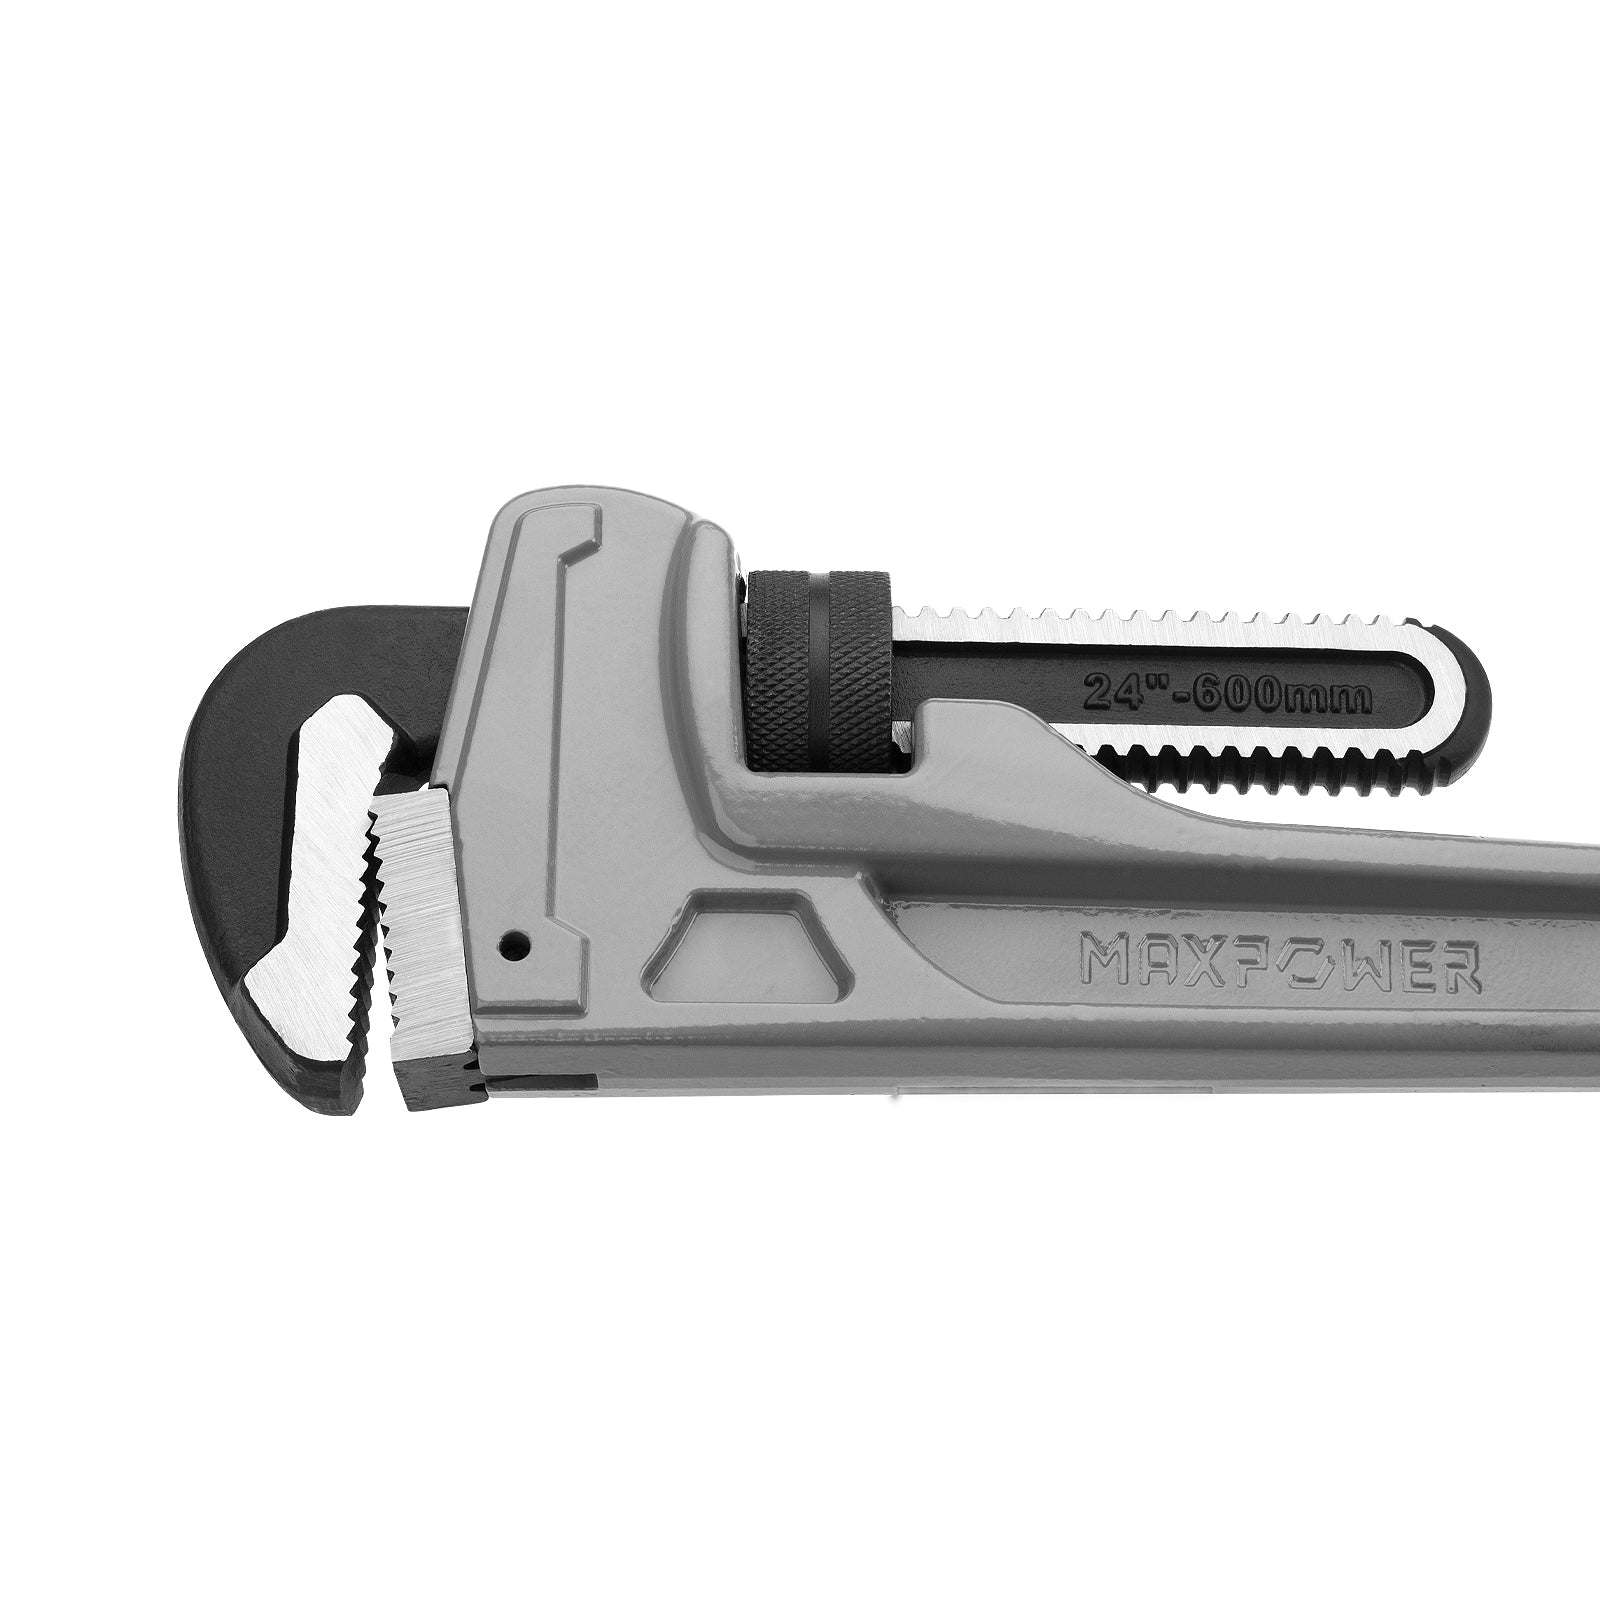 MAXPOWER Aluminum Straight Pipe Wrench, 24 Inch(600mm)